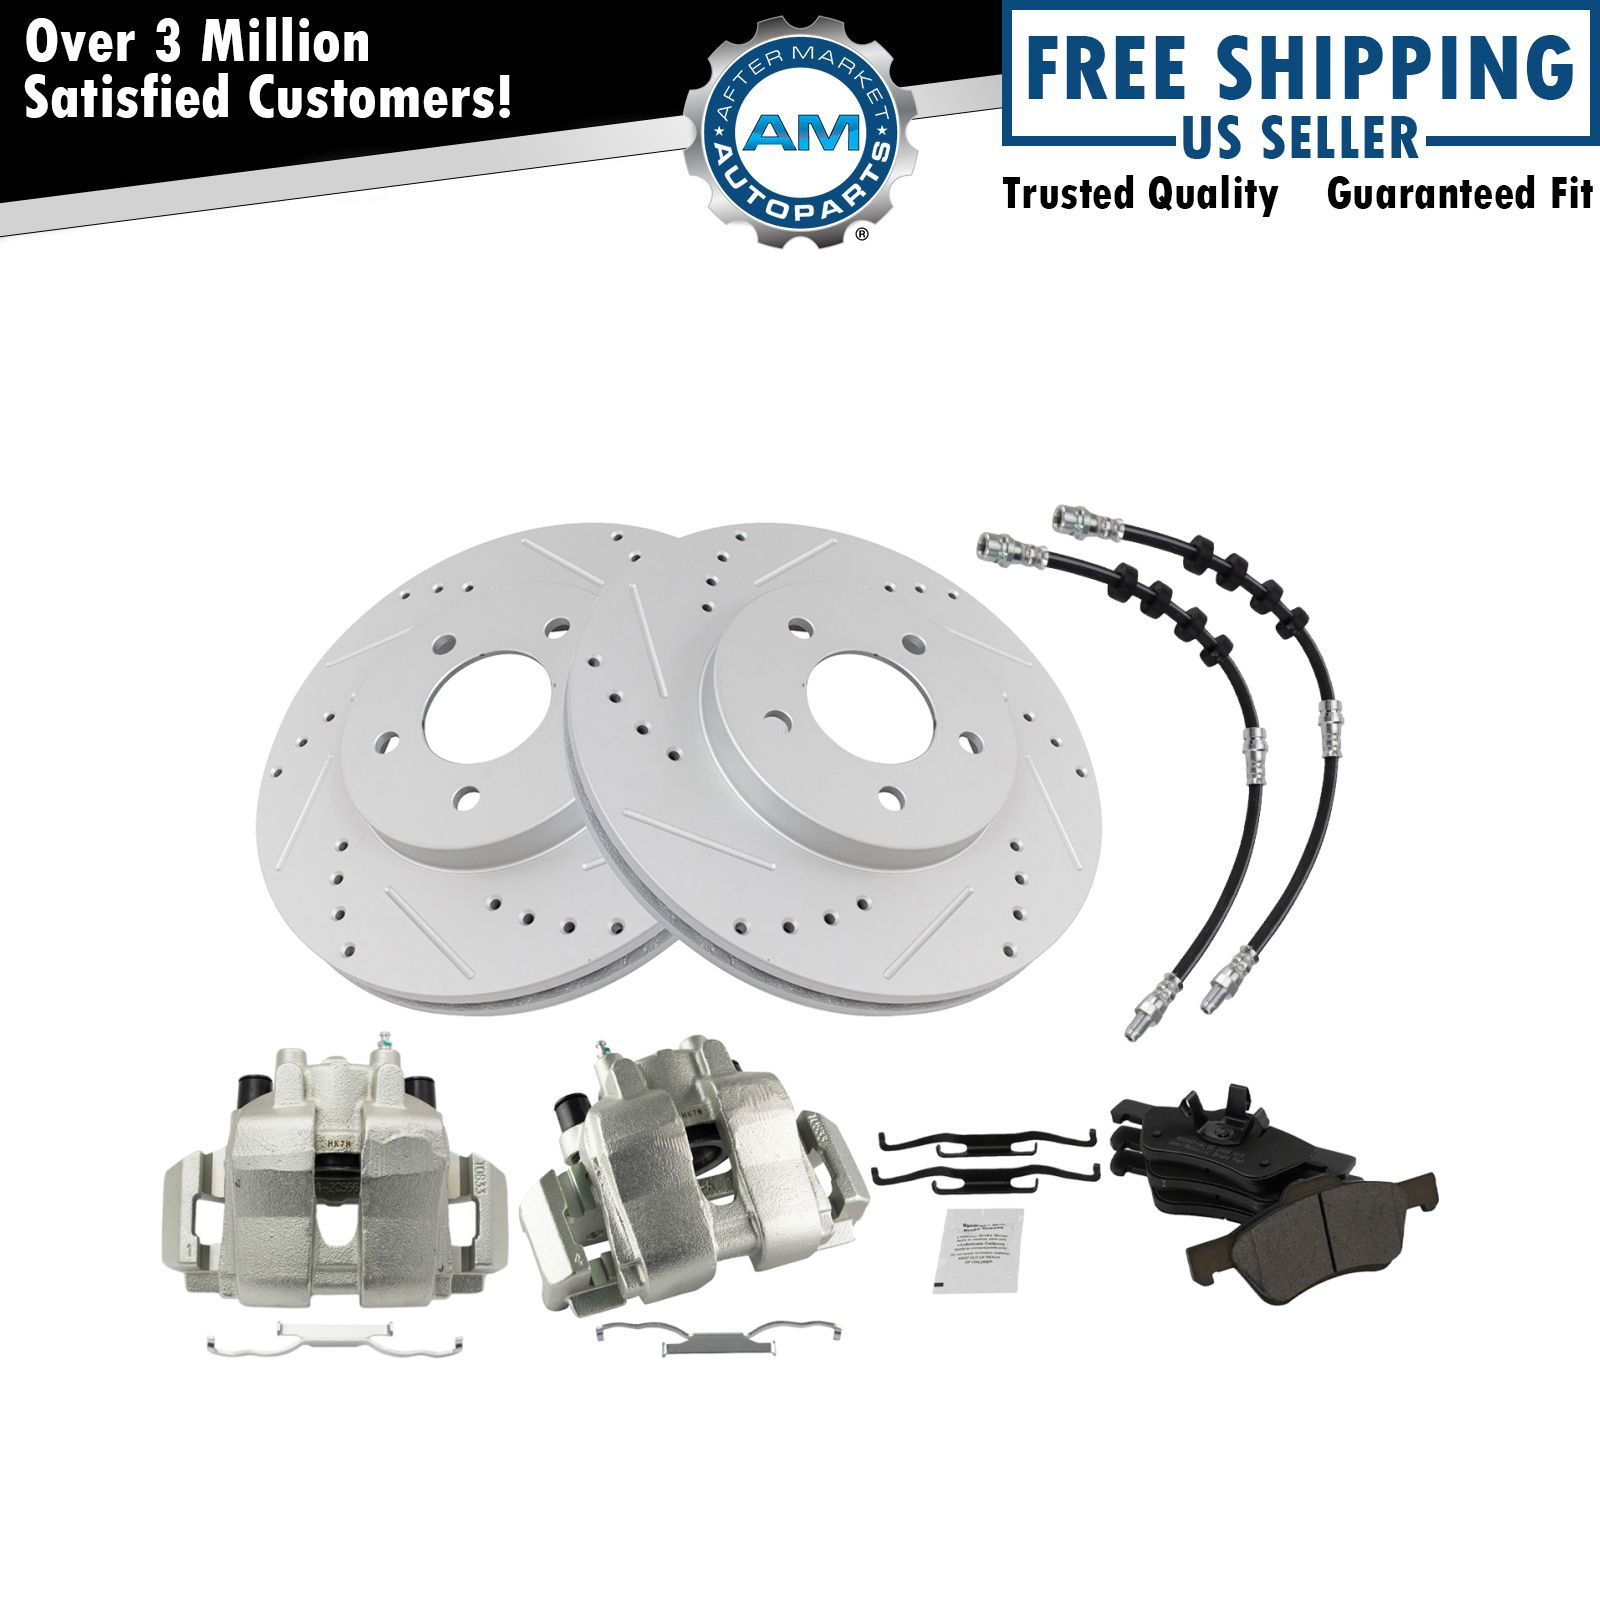 Front Brake Pad & Rotor Kit For 08-09 Ford Escape Mazda Tribute Mercury Mariner